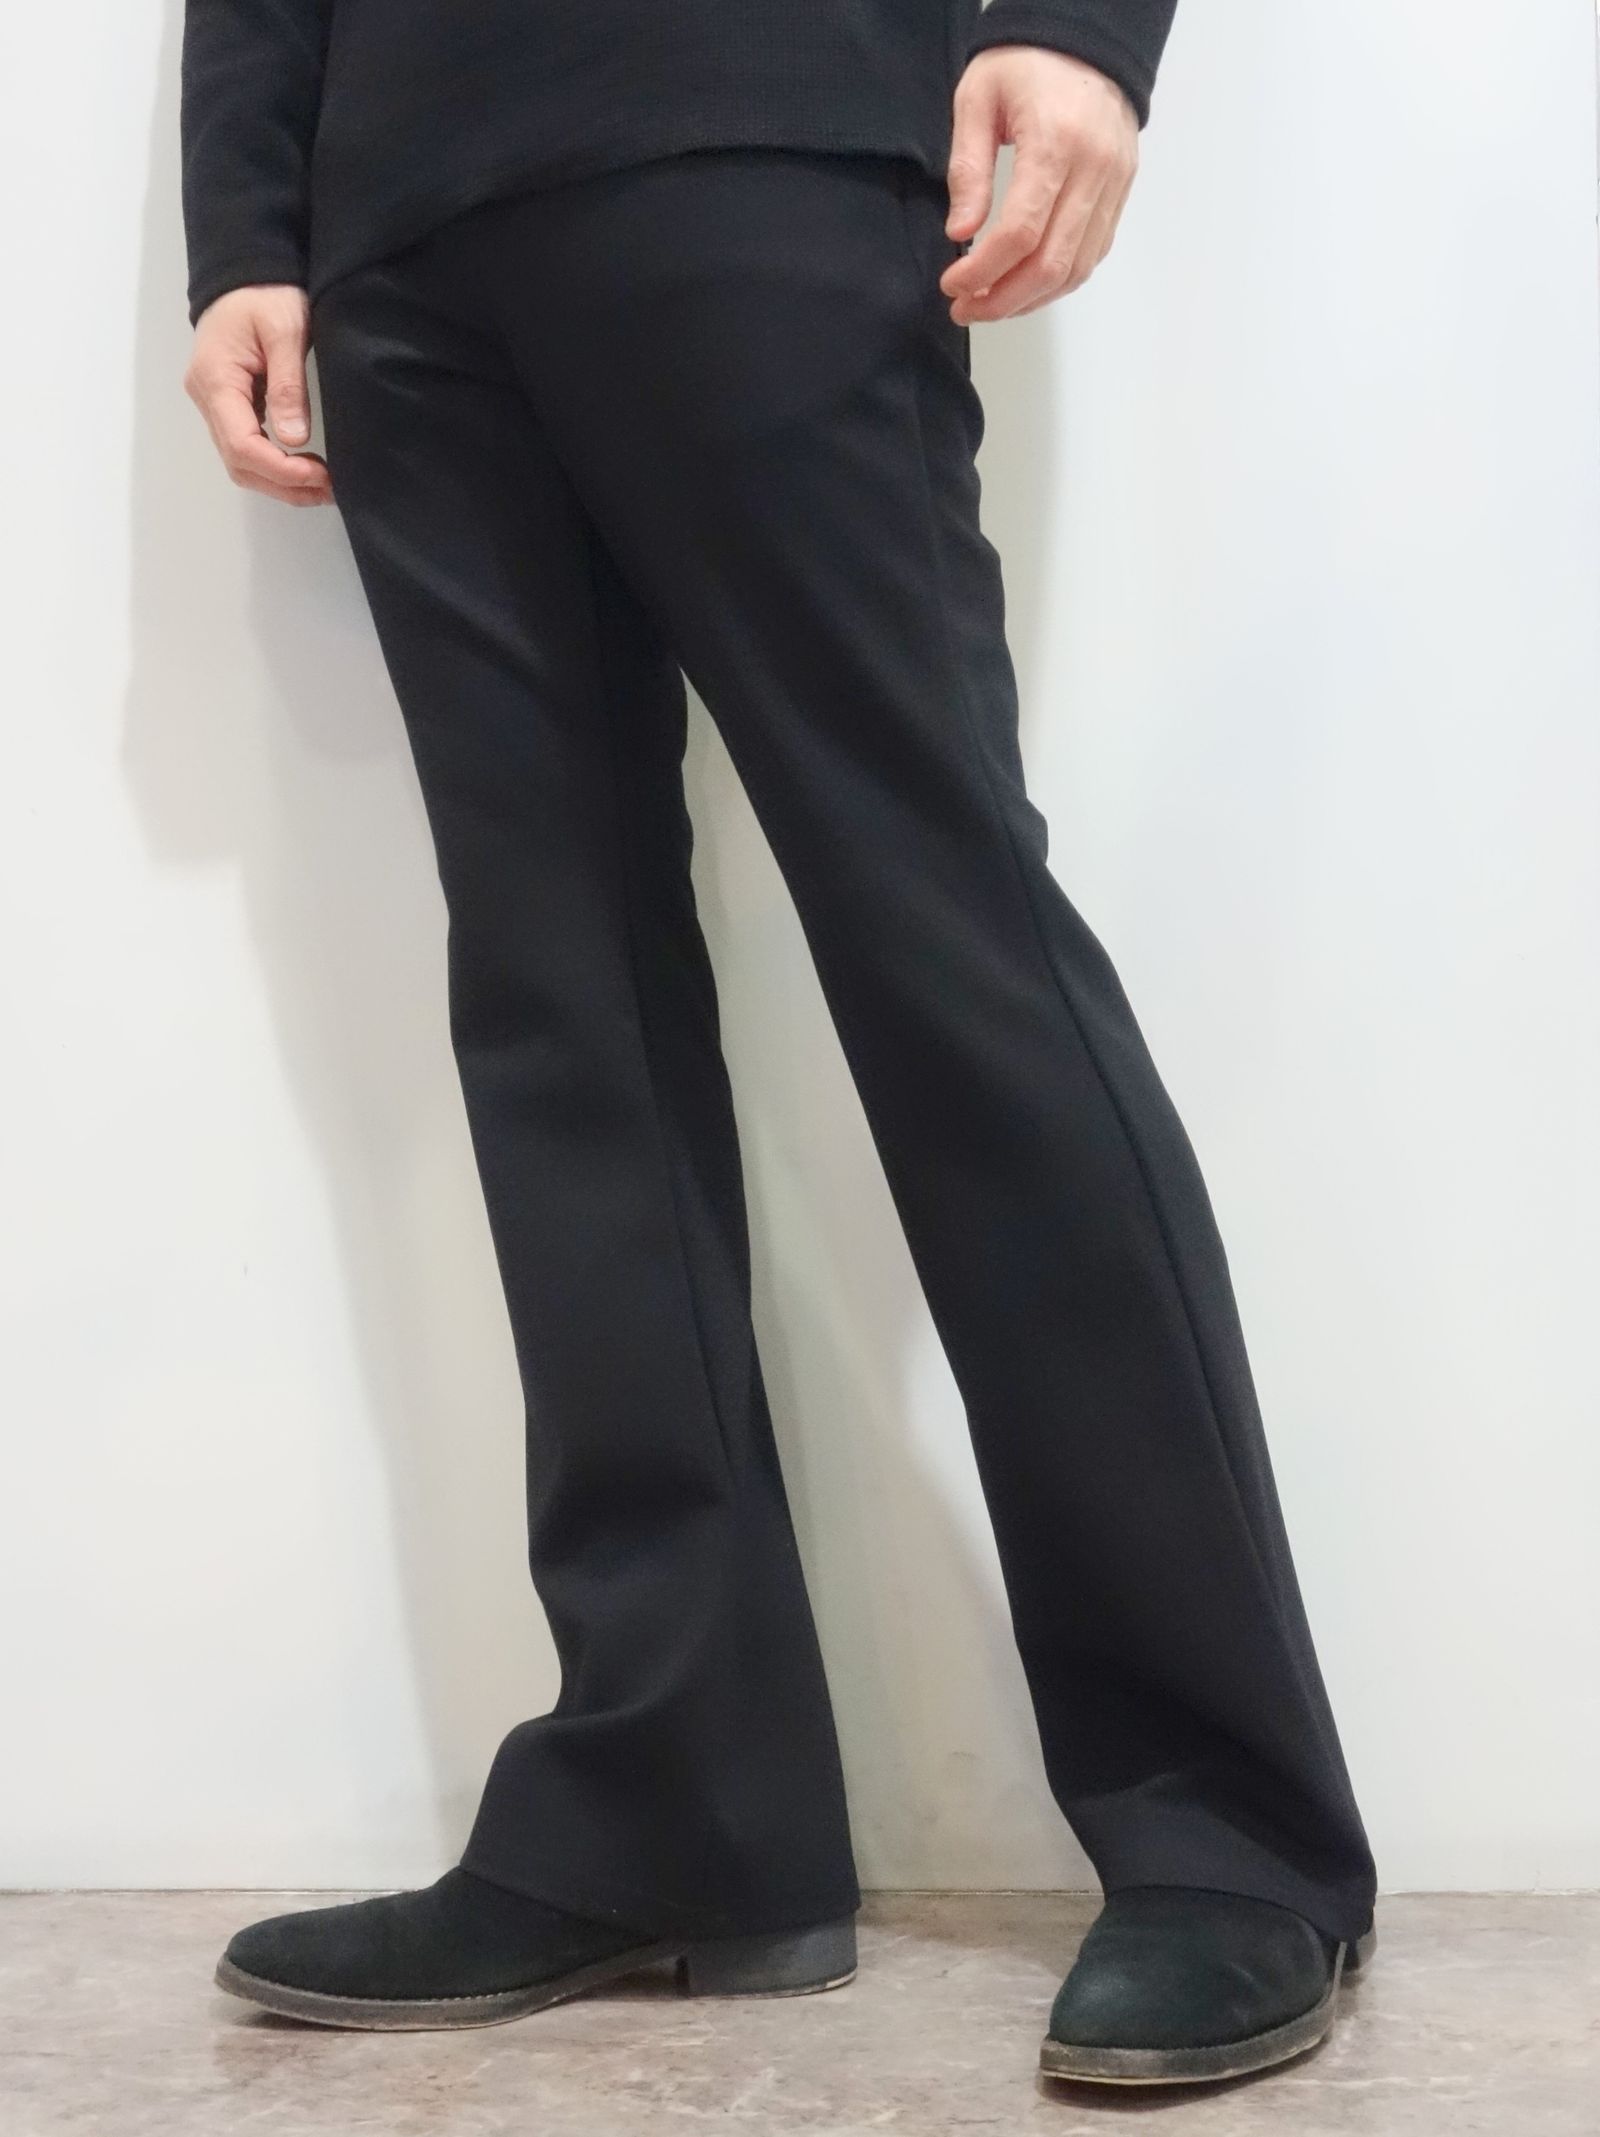 RESOUND CLOTHING - FLARE EASY PANTS / RC23-BT-025 / ブーツ